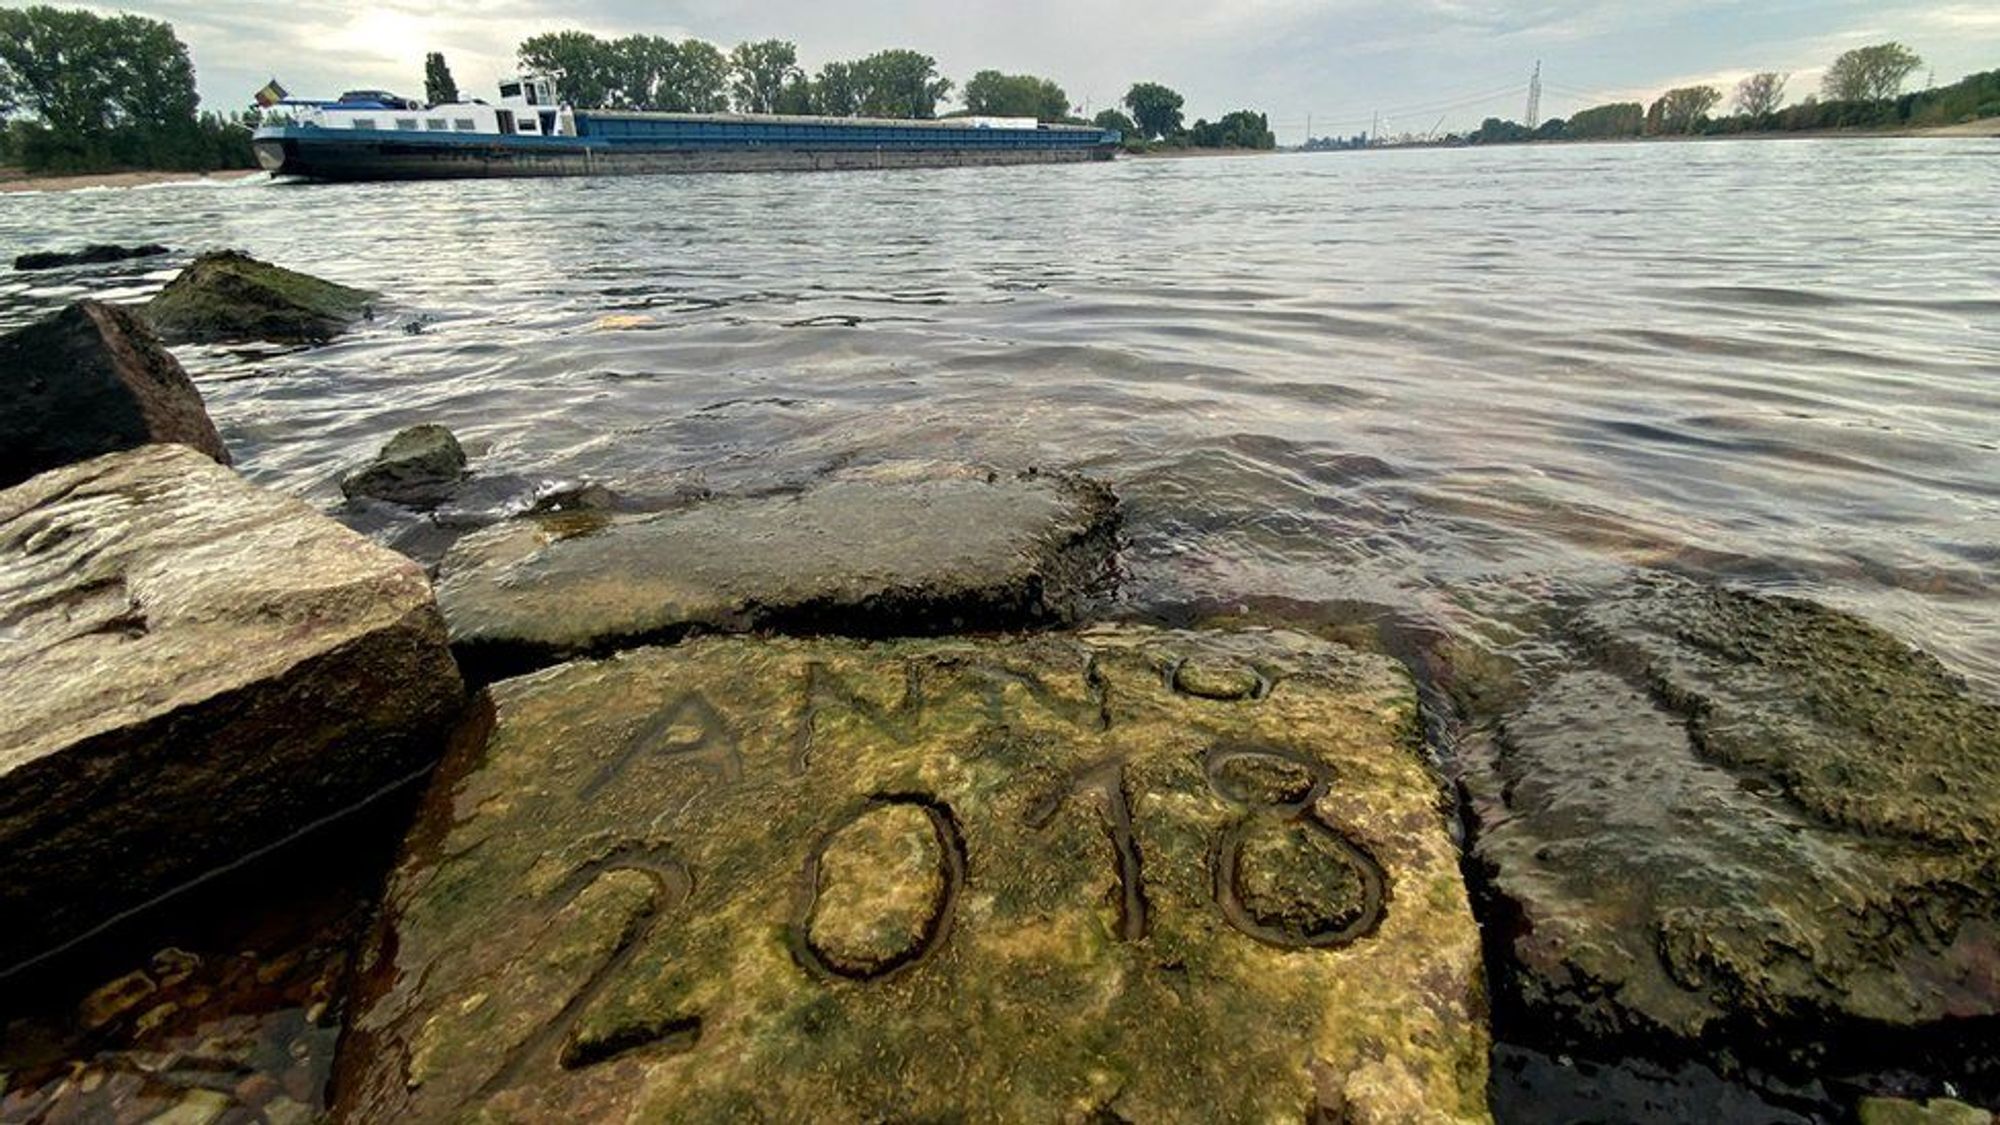 In pictures: Drought in Europe exposes sunken ships, lost villages and ominous 'hunger stones' - BBC News